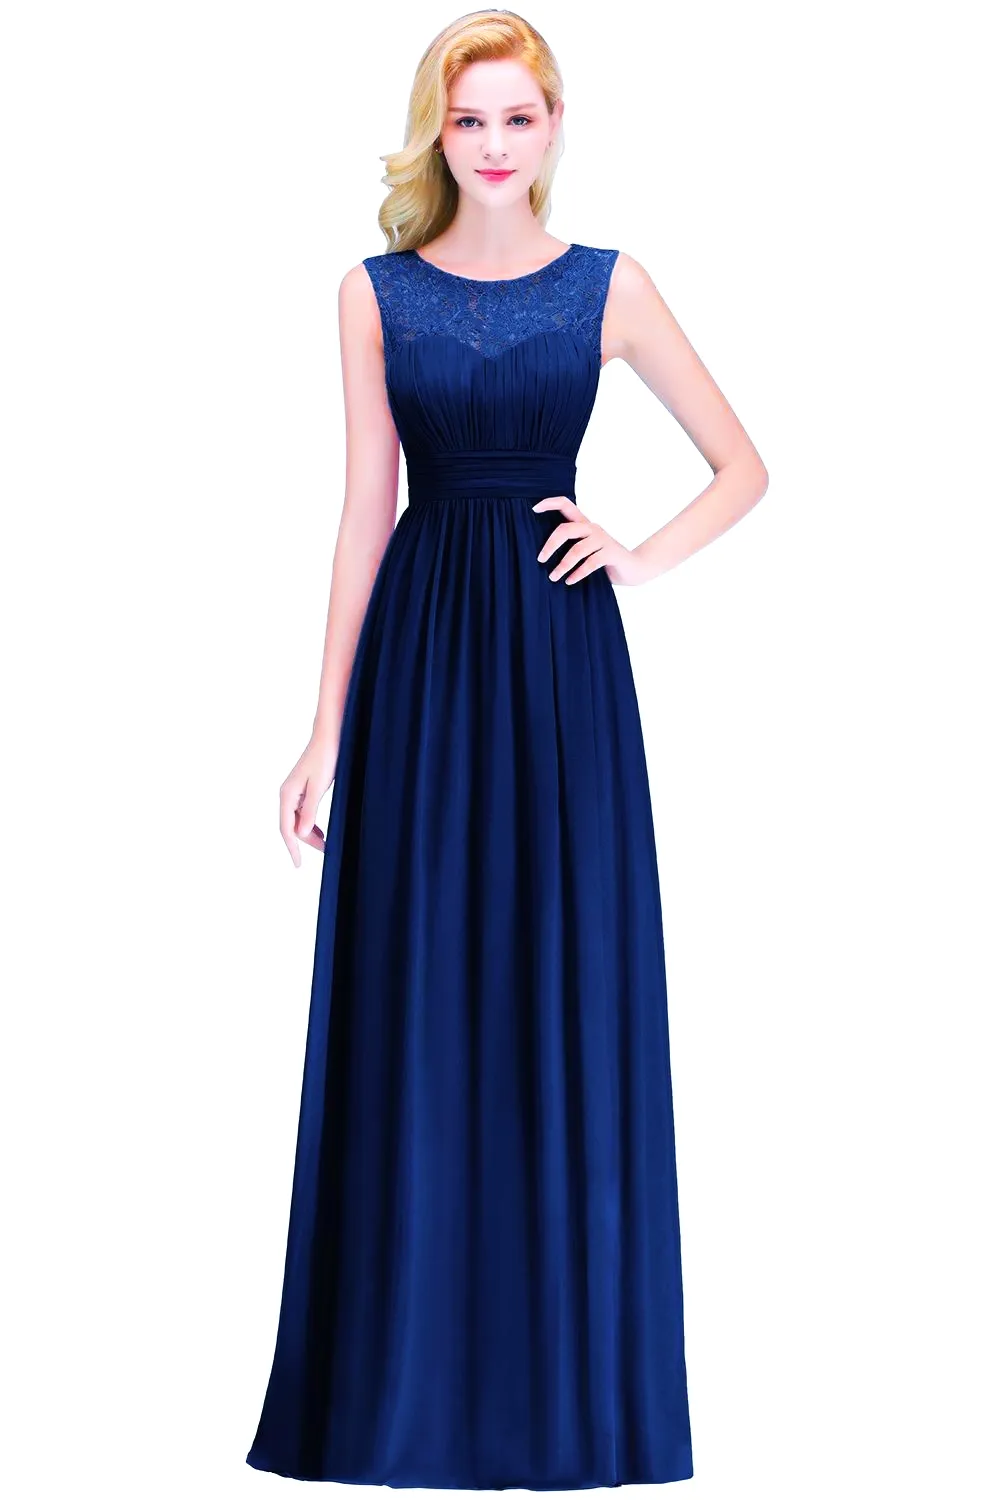 Ny ankomst Blush Pink Navy Blue Bourgogne Long Bridesmaid Dresses Lace Chiffon Flound Length Beach Garden Maid of Honor Gowns Dh4258